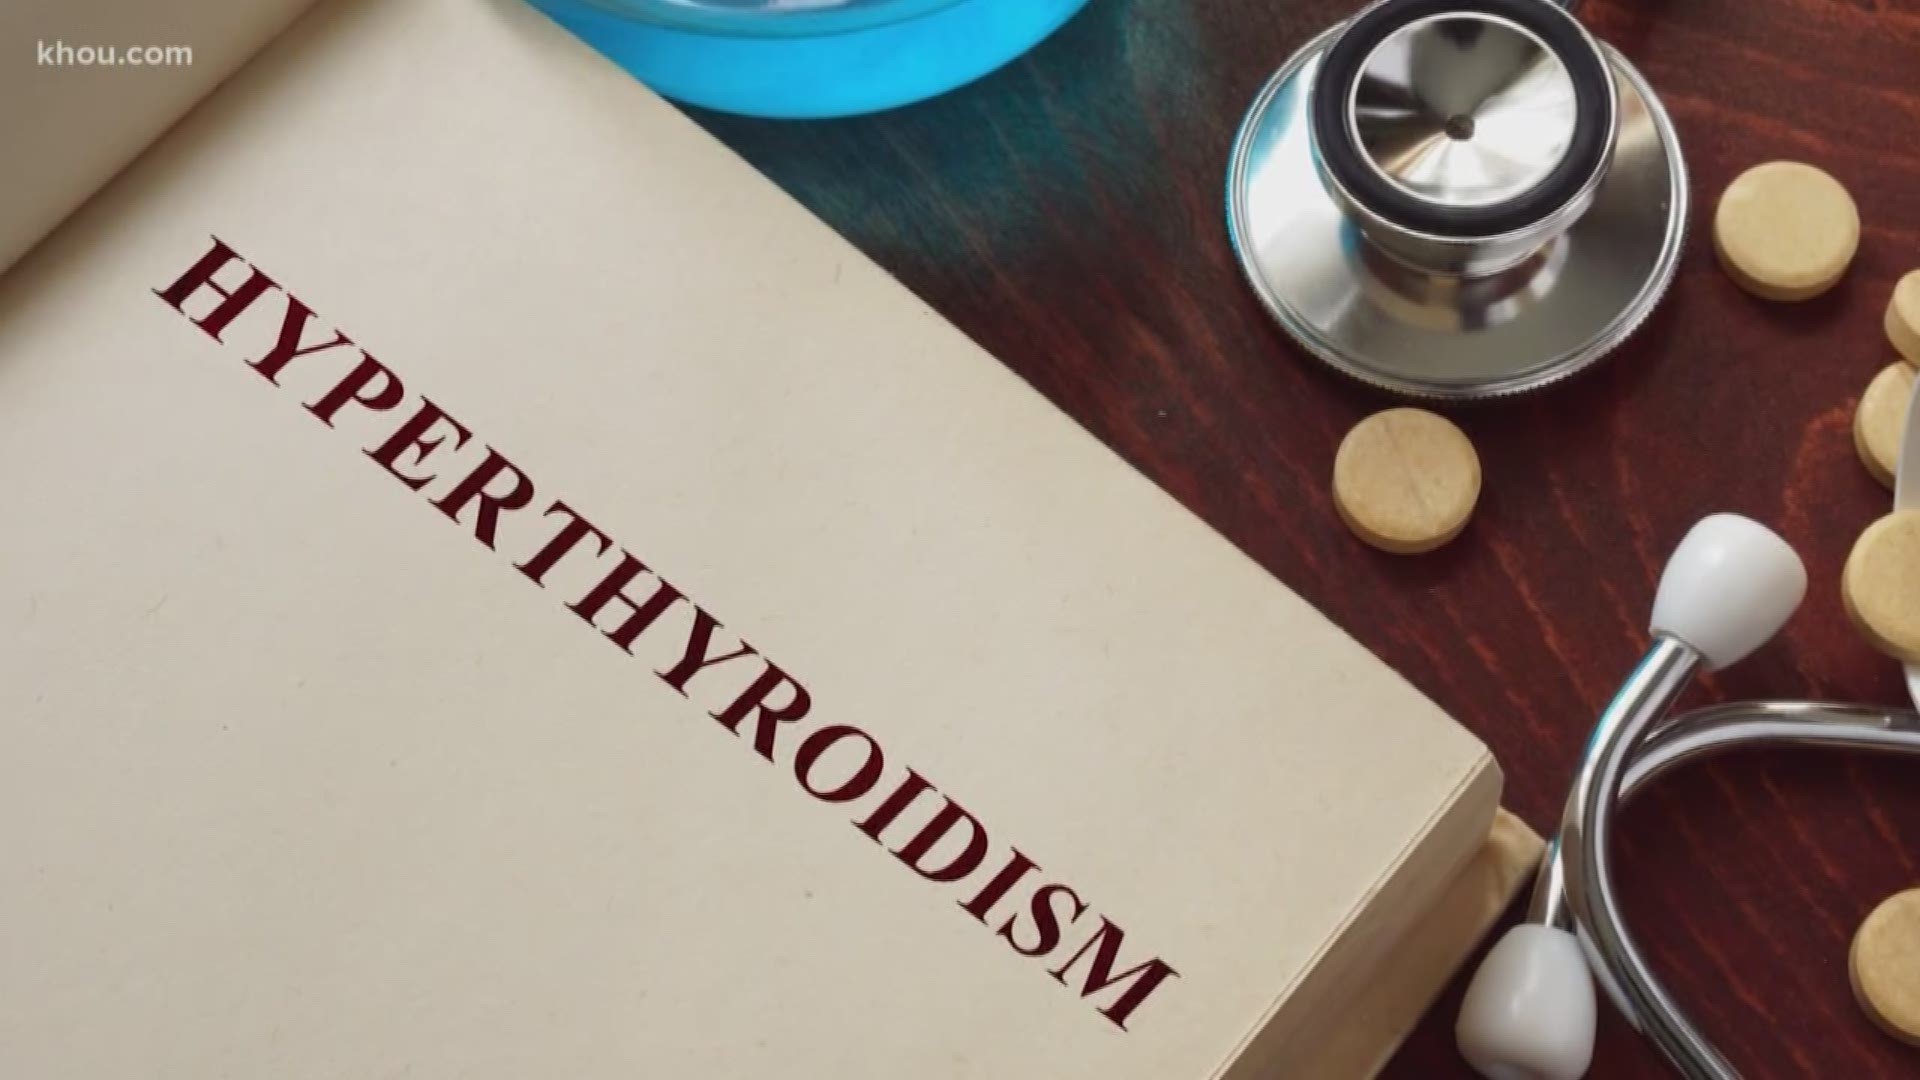 In "Wear the Gown" with UT Physicians, we take a closer look at types of thyroid conditions and why it's important to know the symptoms.